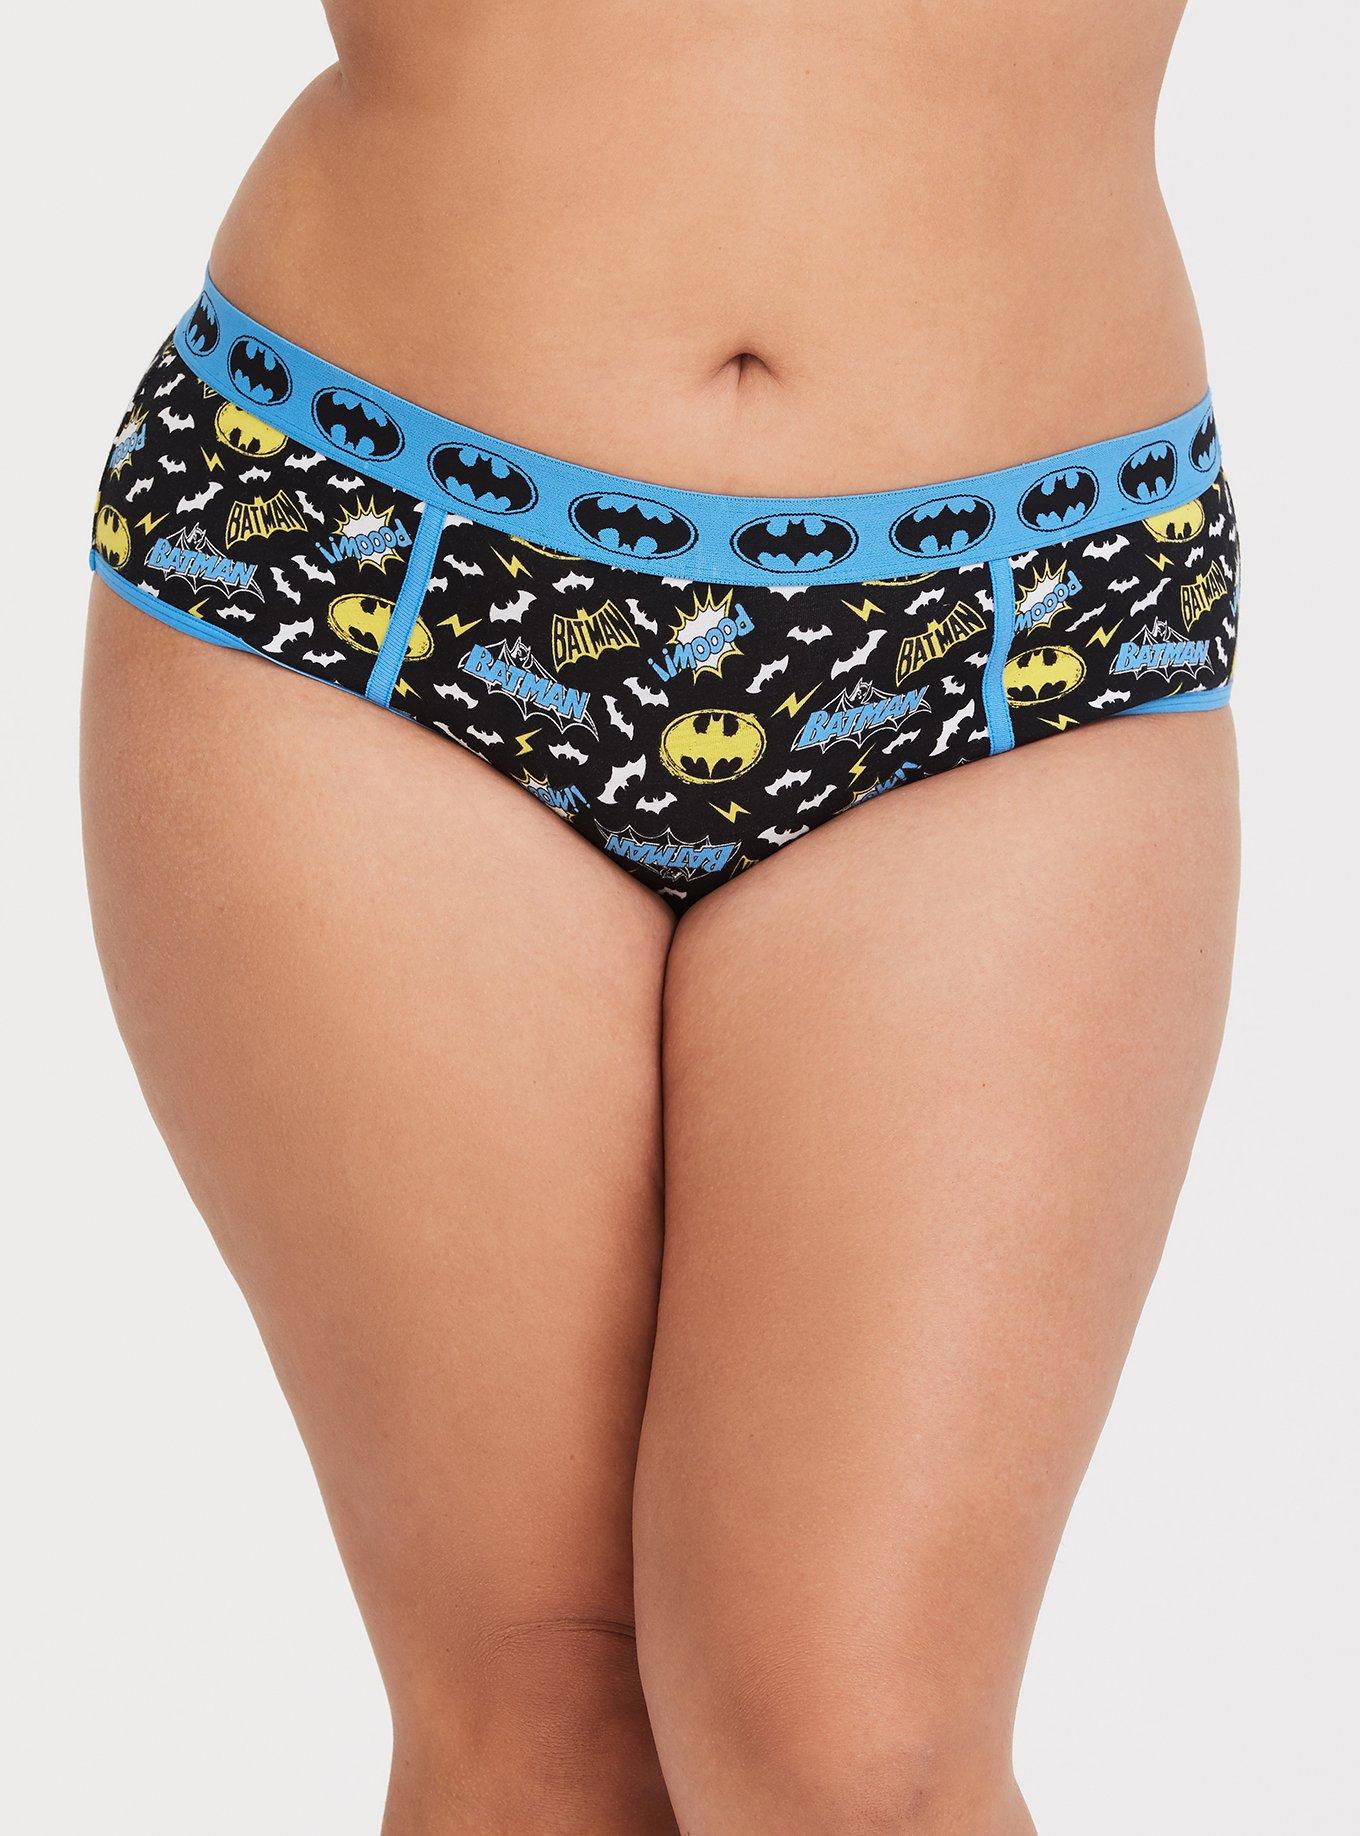 Star Superheroine Ring Top with Lowrise Cheeky Bottoms - The